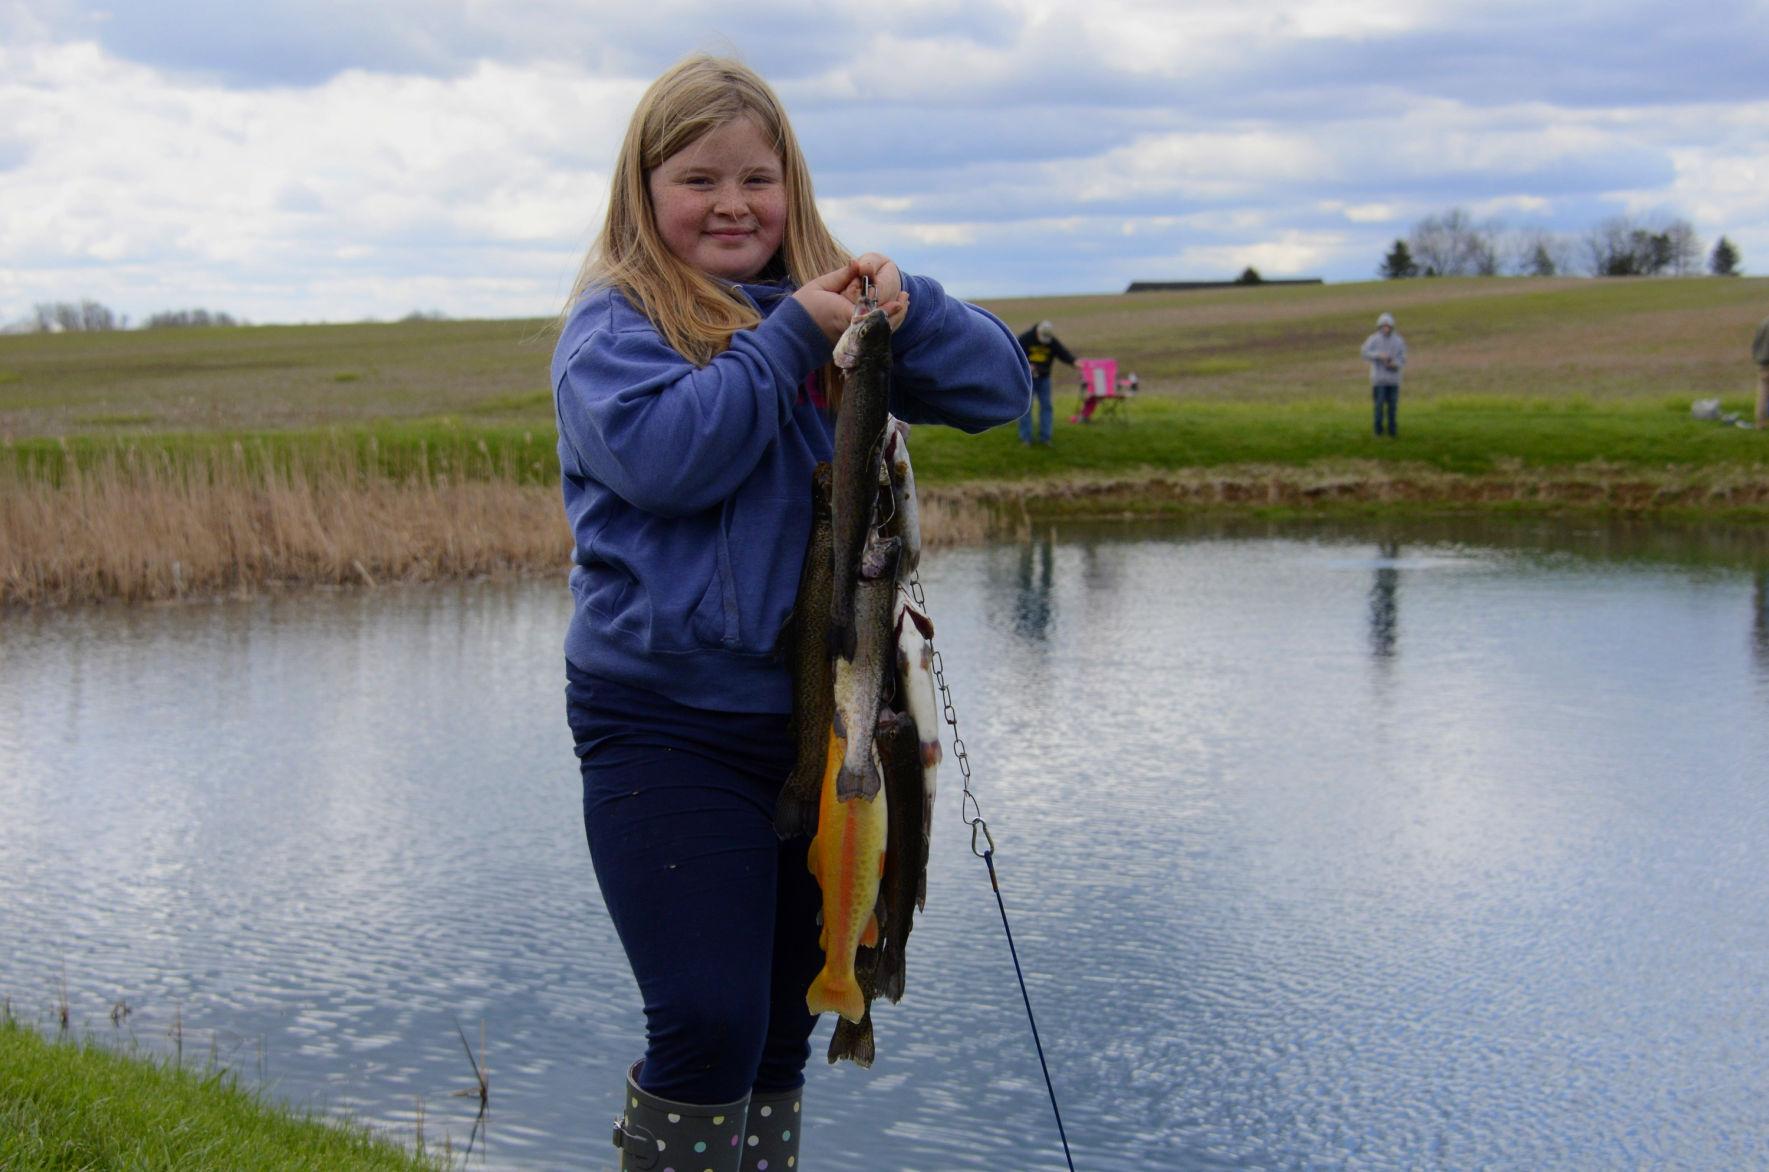 Youth fishing derby brings family fun to Burkittsville